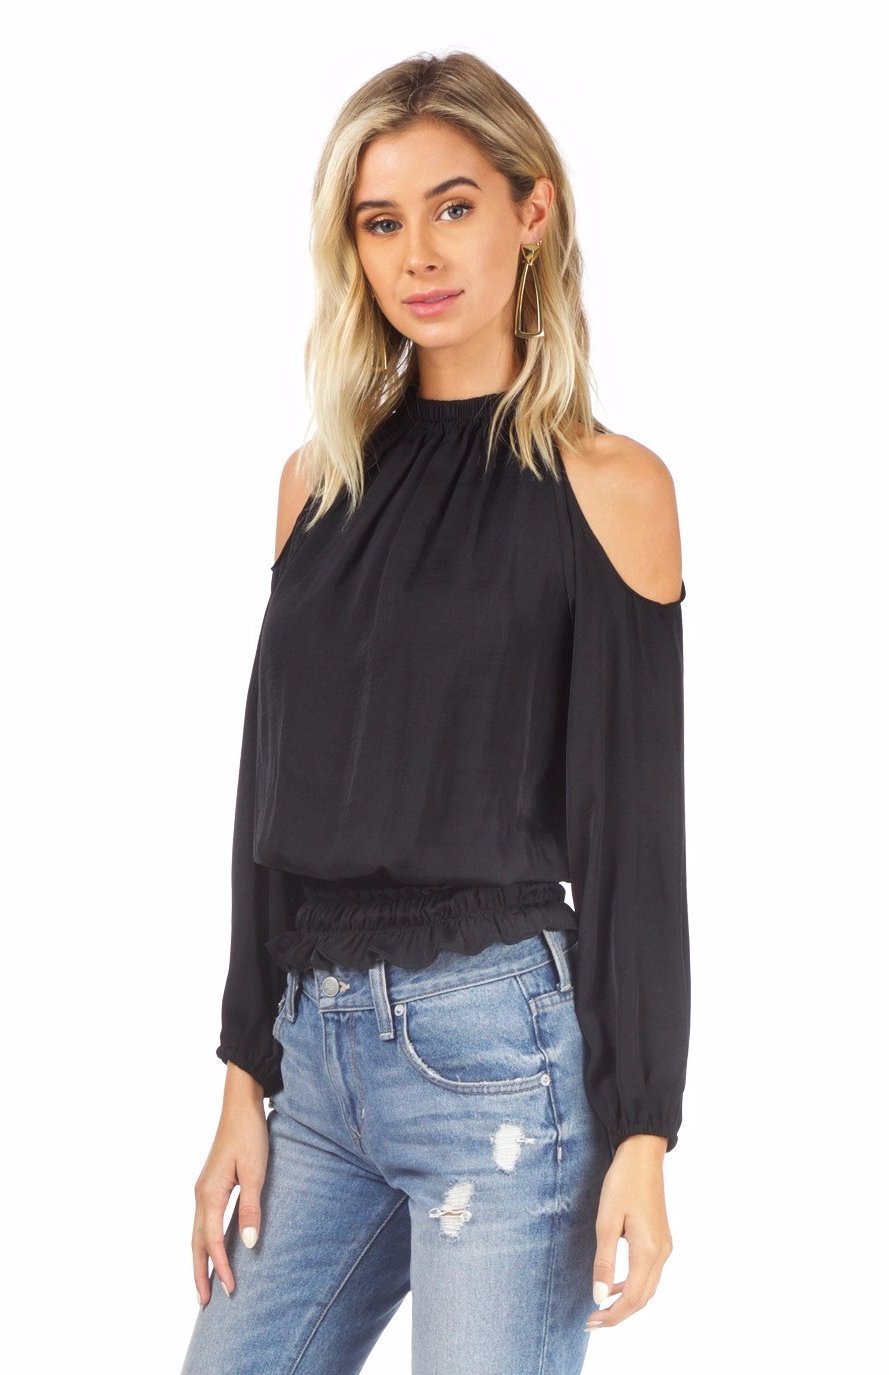 Woman wearing a top rental from AQUA called Cold Shoulder Top